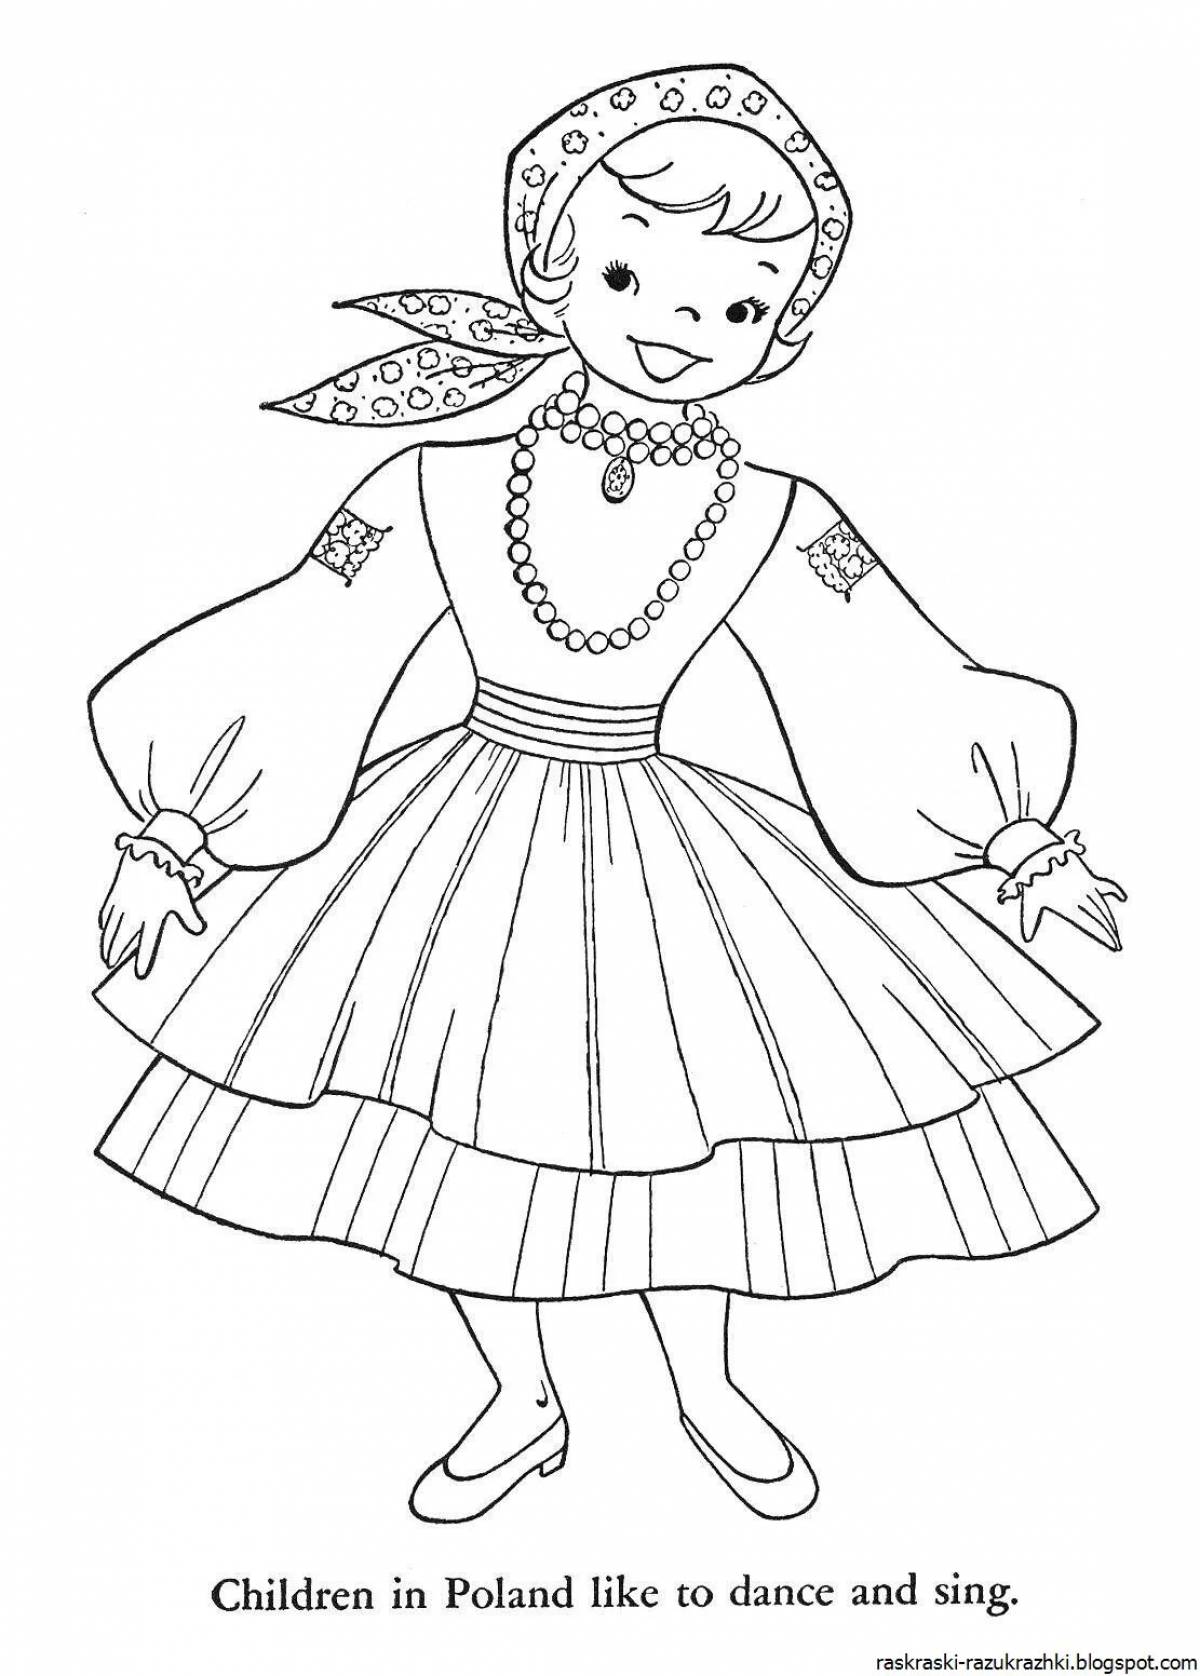 Fancy folk costumes coloring pages for kids